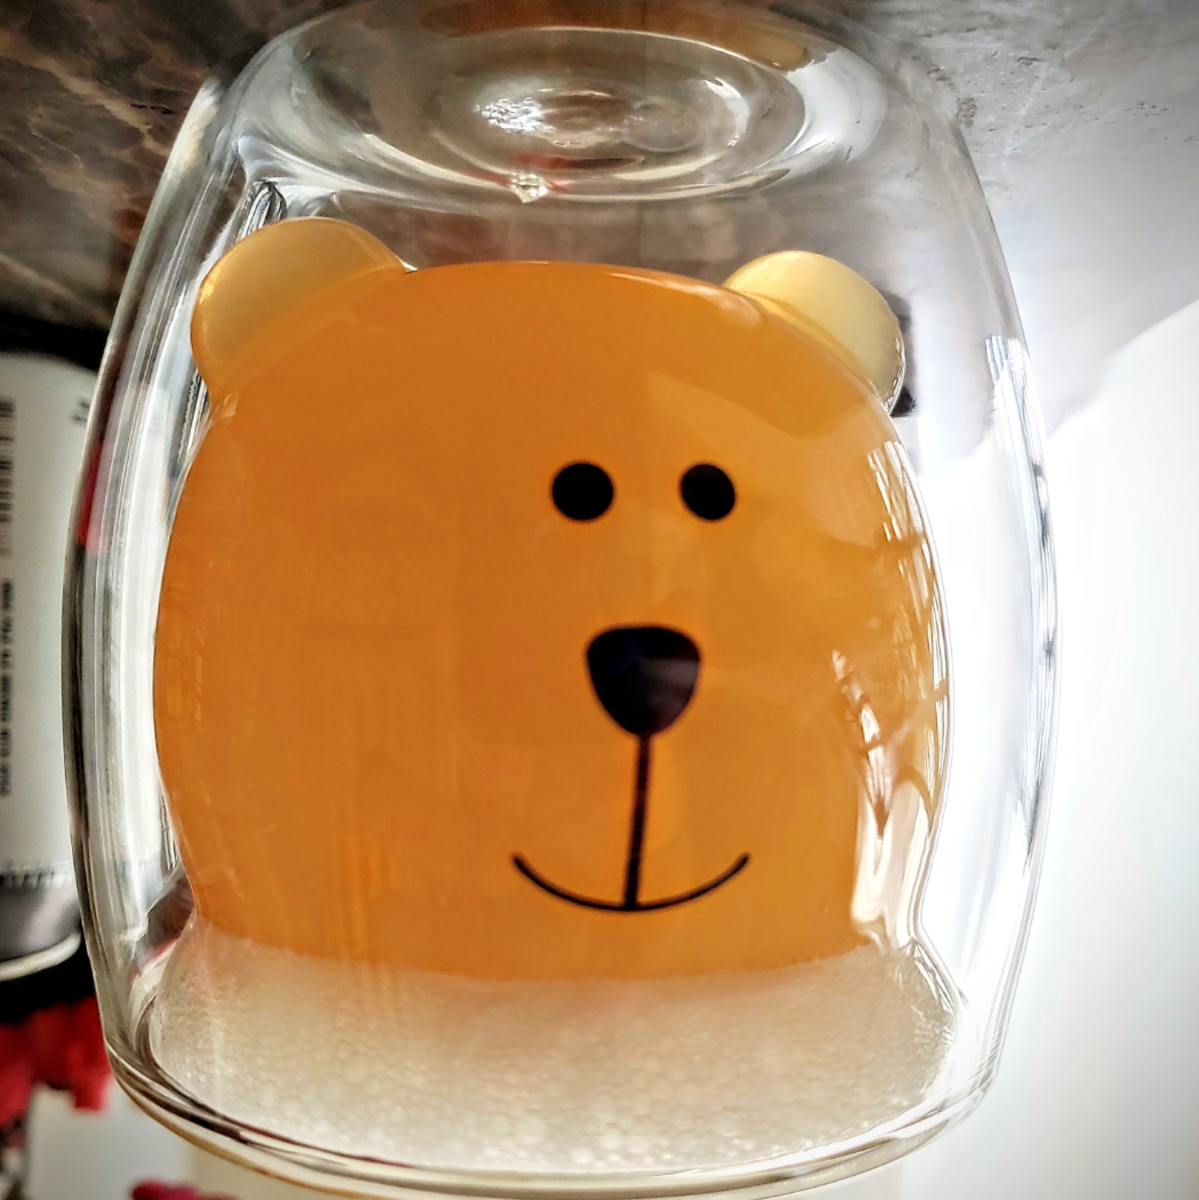 This Bears For You: Bobs Beer Break